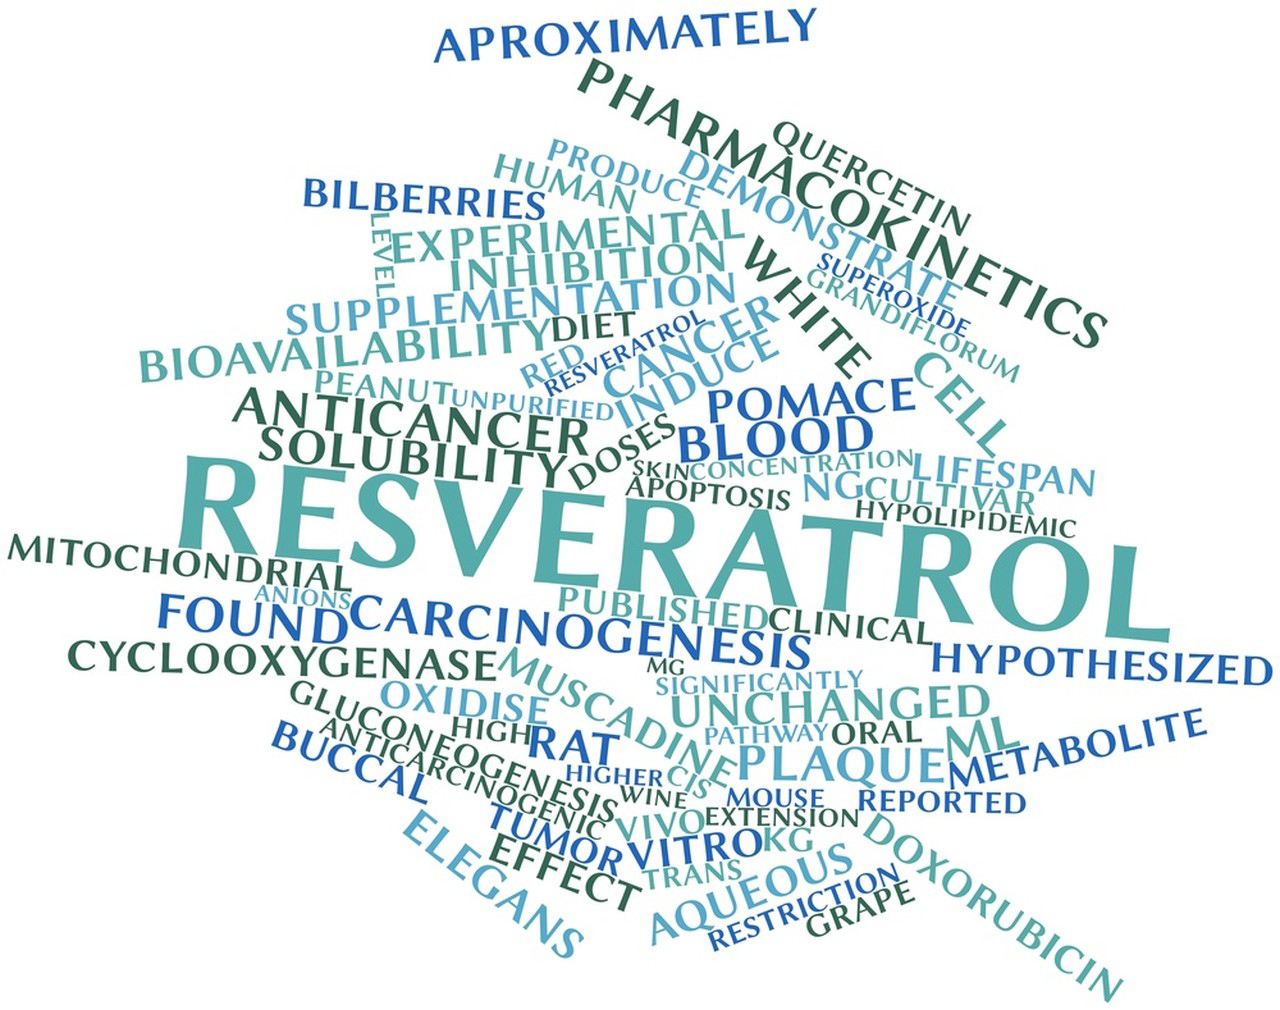 Effectiveness, side effects and special considerations of Resveratrol-Xi'an Lyphar Biotech Co., Ltd